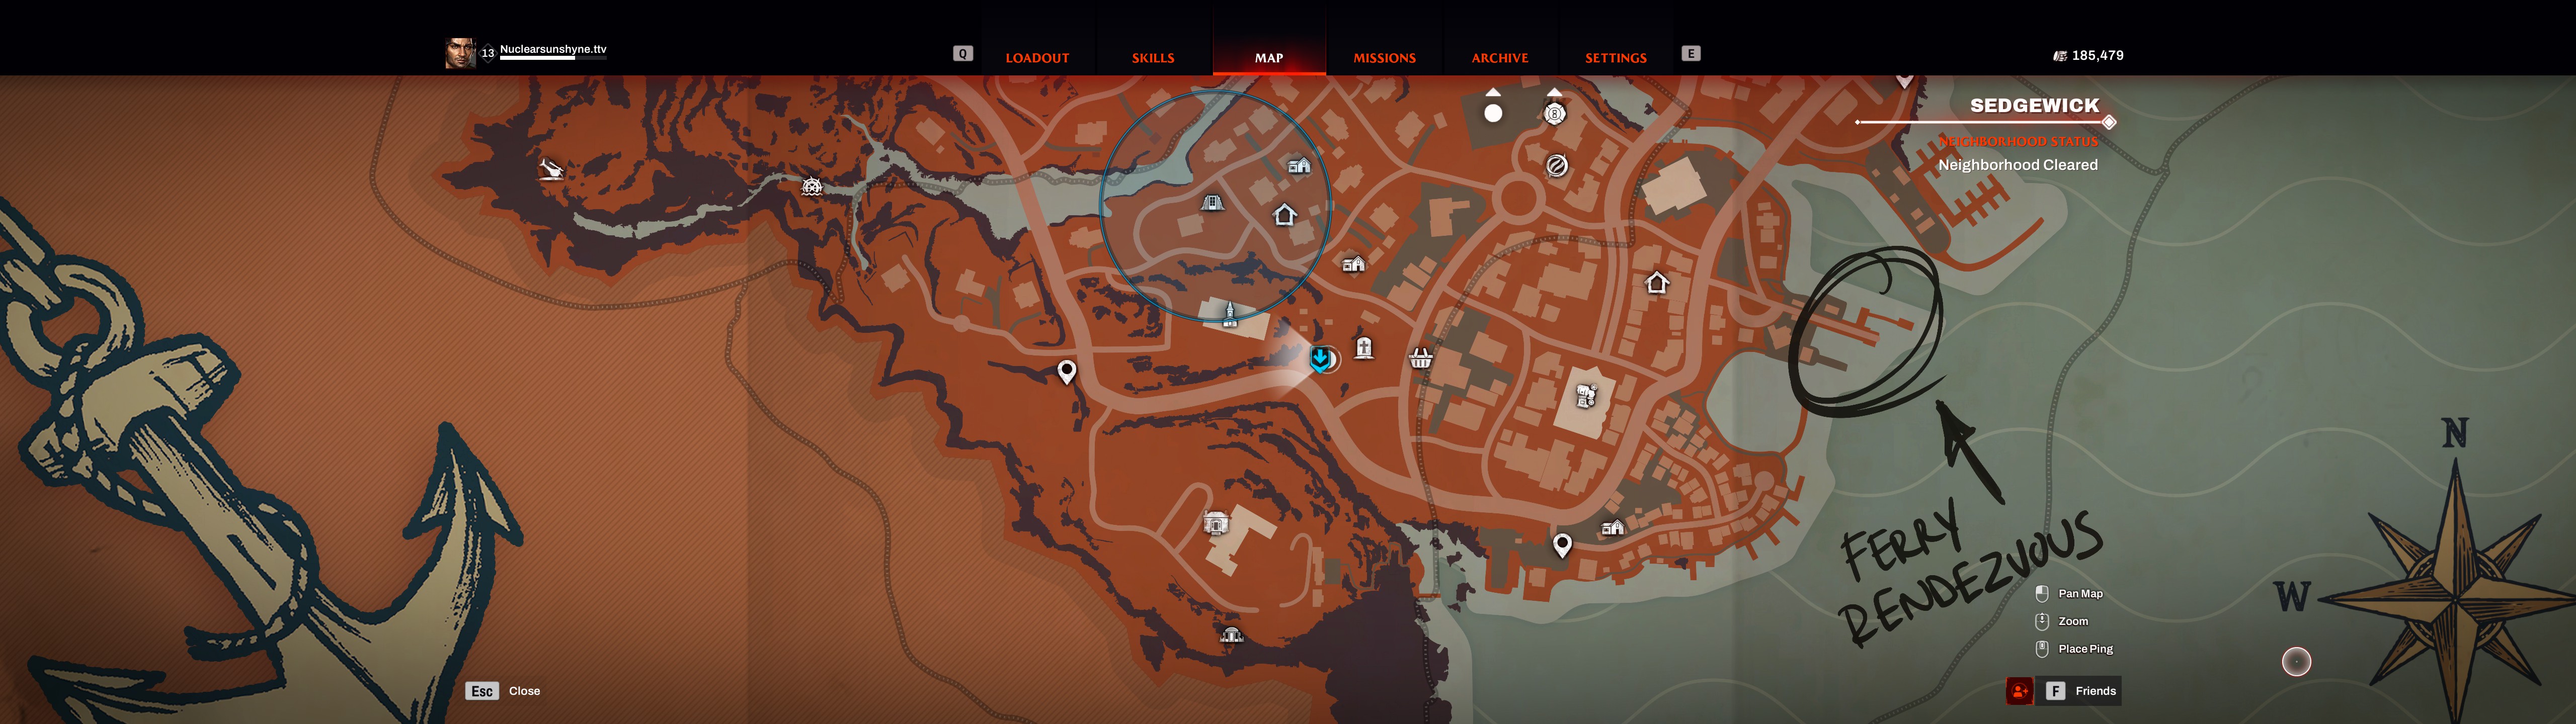 Redfall - Grave lock collectibles locations - Redfall Commons - EDD4F37